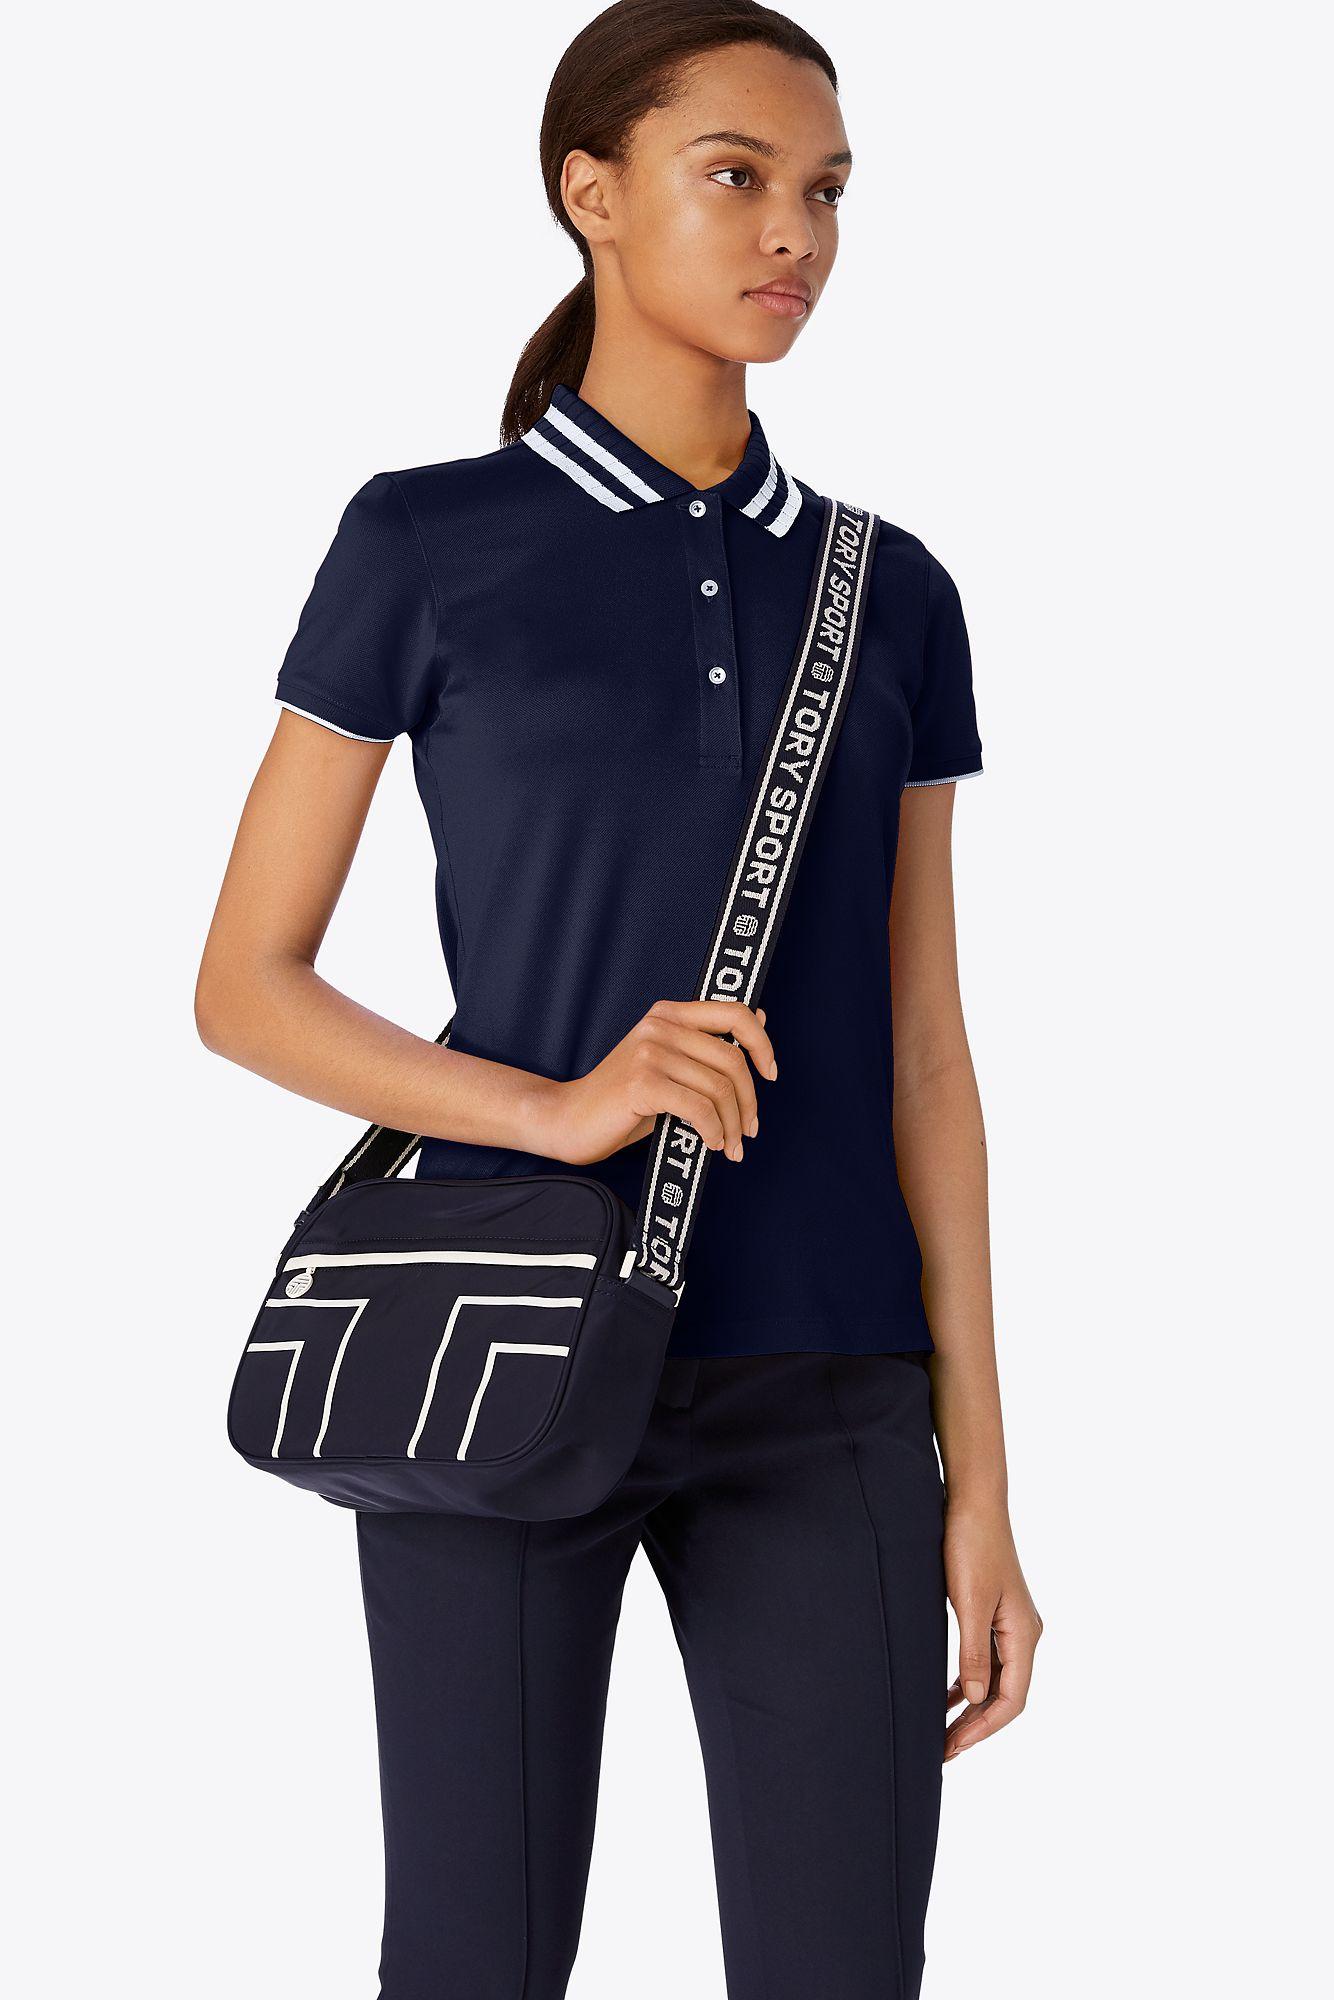 Tory Burch on Twitter The elegance of sport  our torysport ruffle  sneakers and convertible tennis tote httpstcoFoJYjg29r6  httpstco1mvi4CE5w6  X